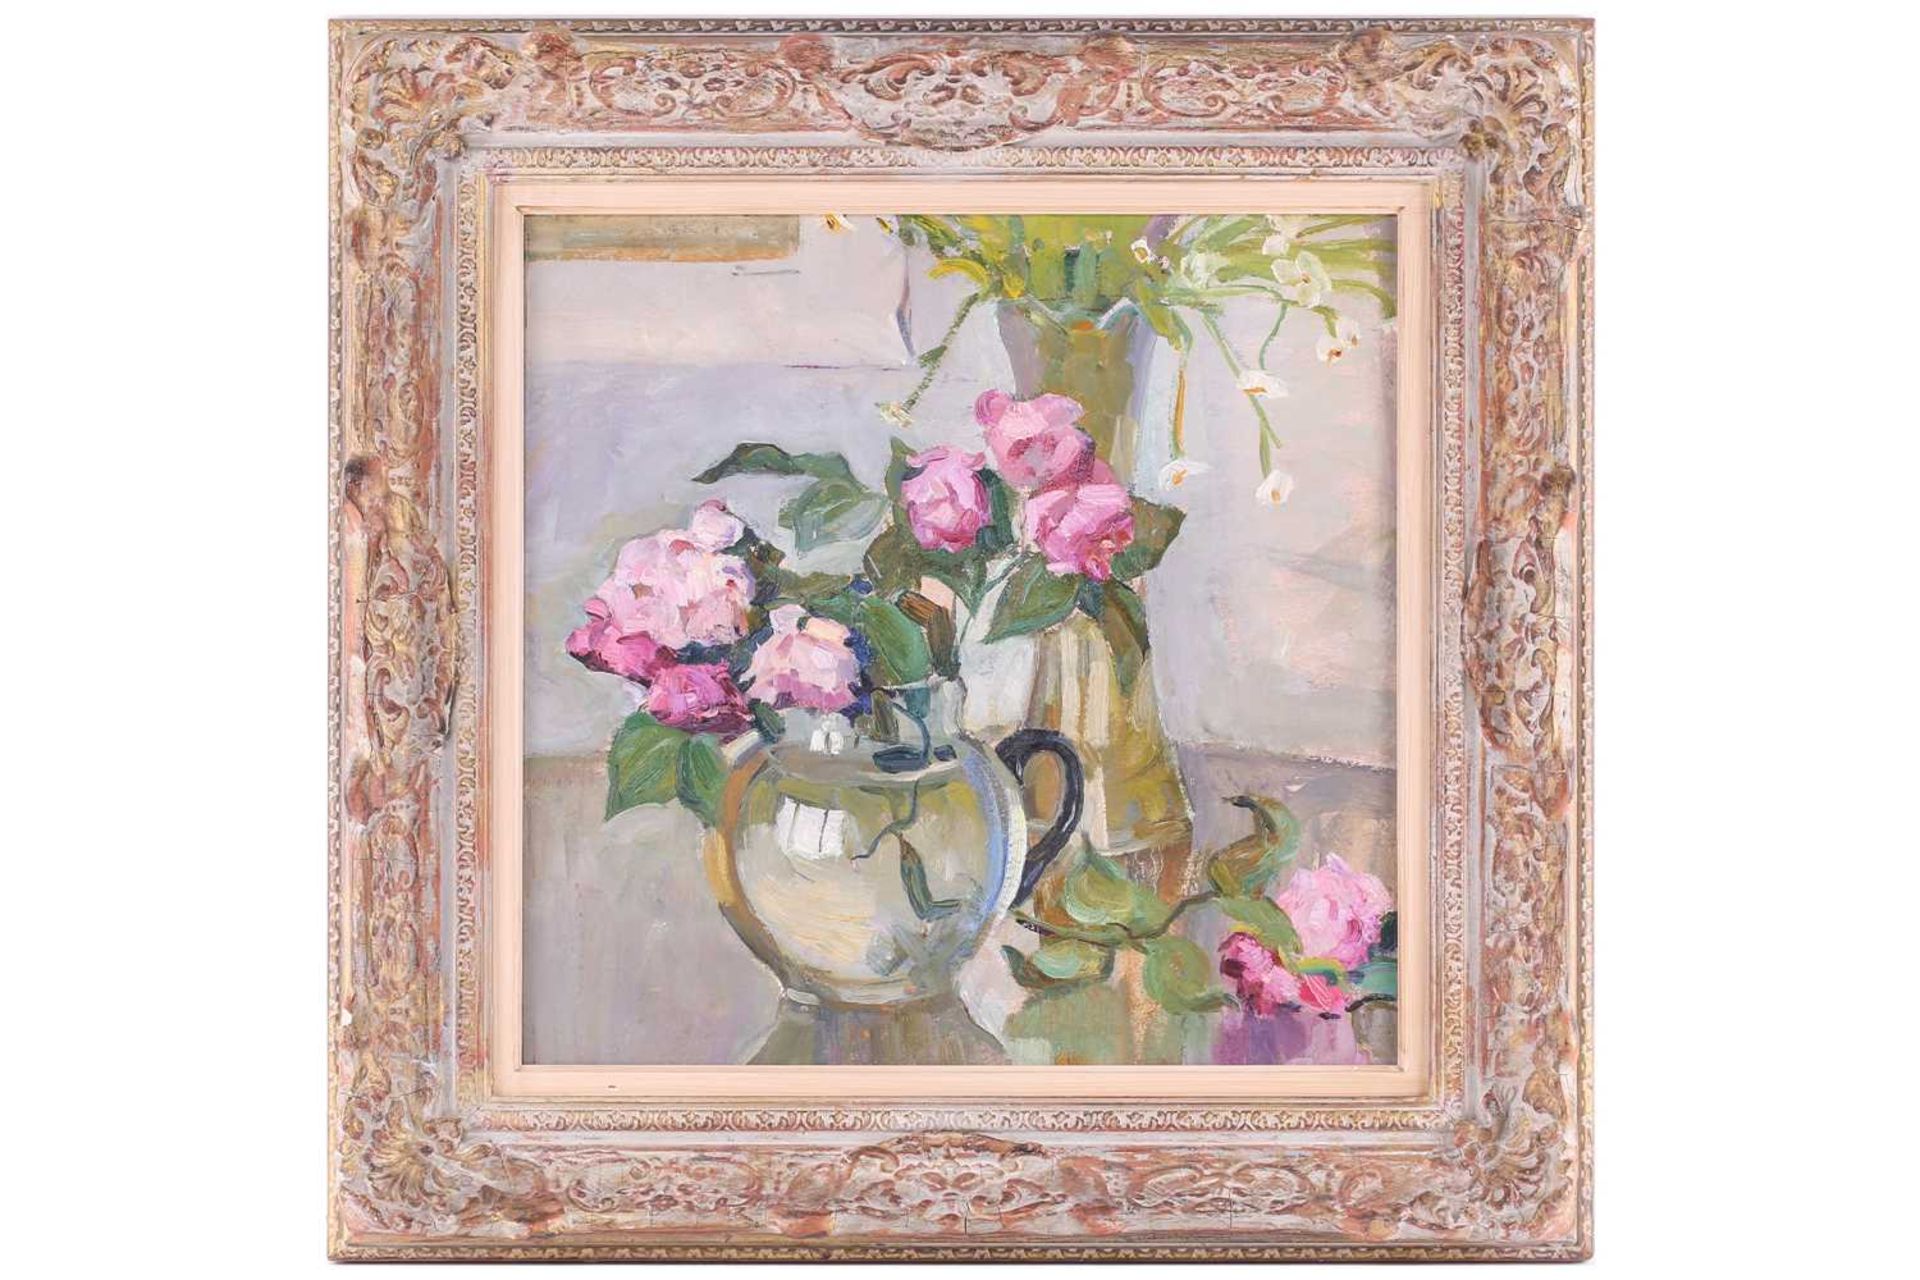 20th-century Russian school, still life study of pink roses in a vase, oil on canvas, 45.5 cm x 47